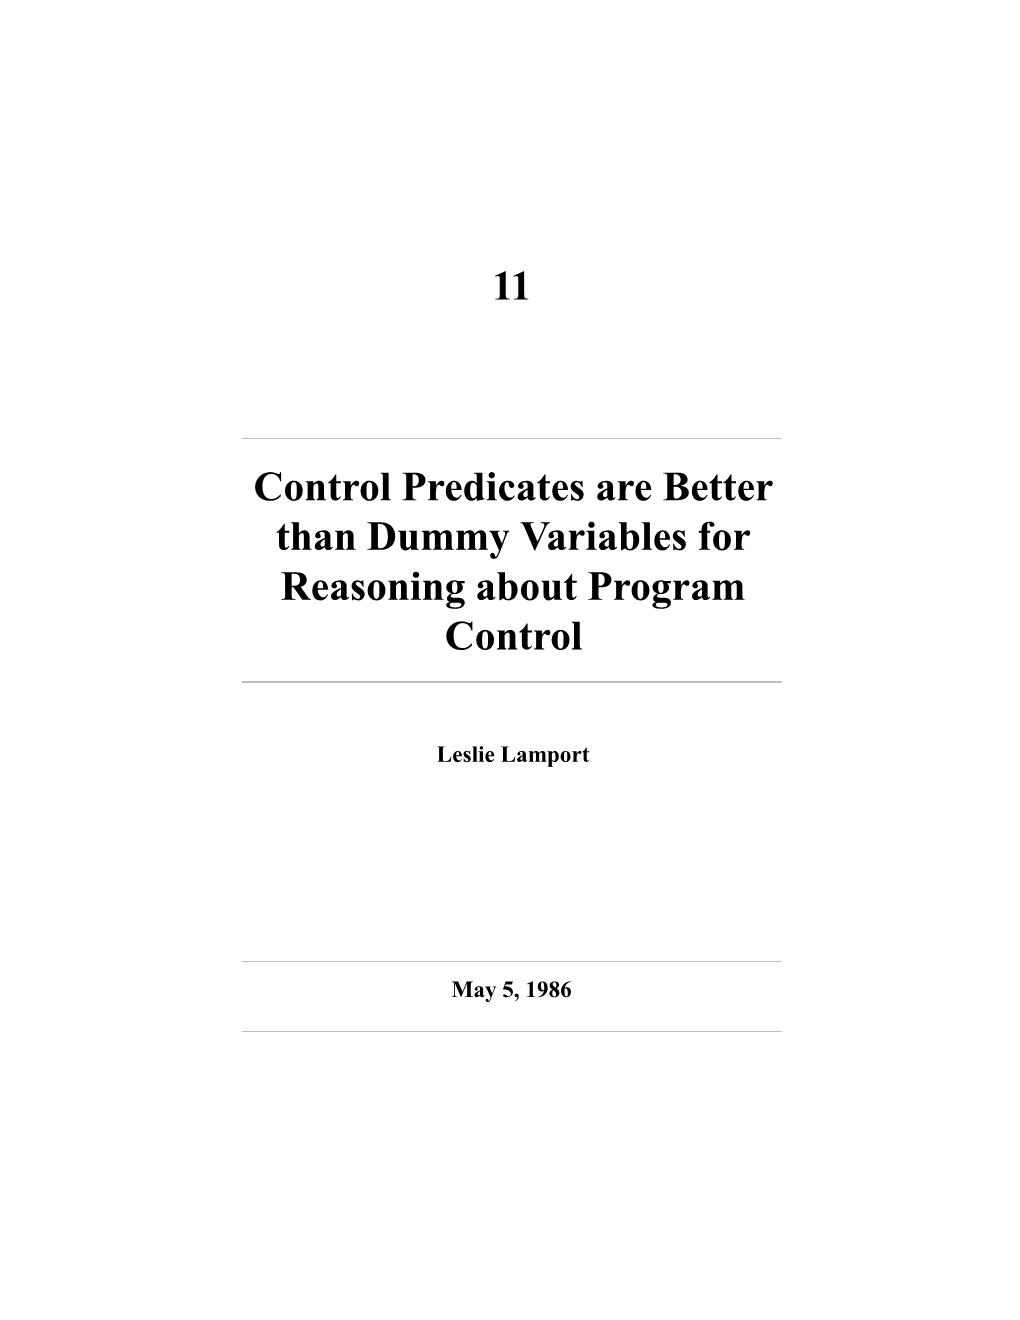 Control Predicates Are Better Than Dummy Variables for Reasoning About Program Control